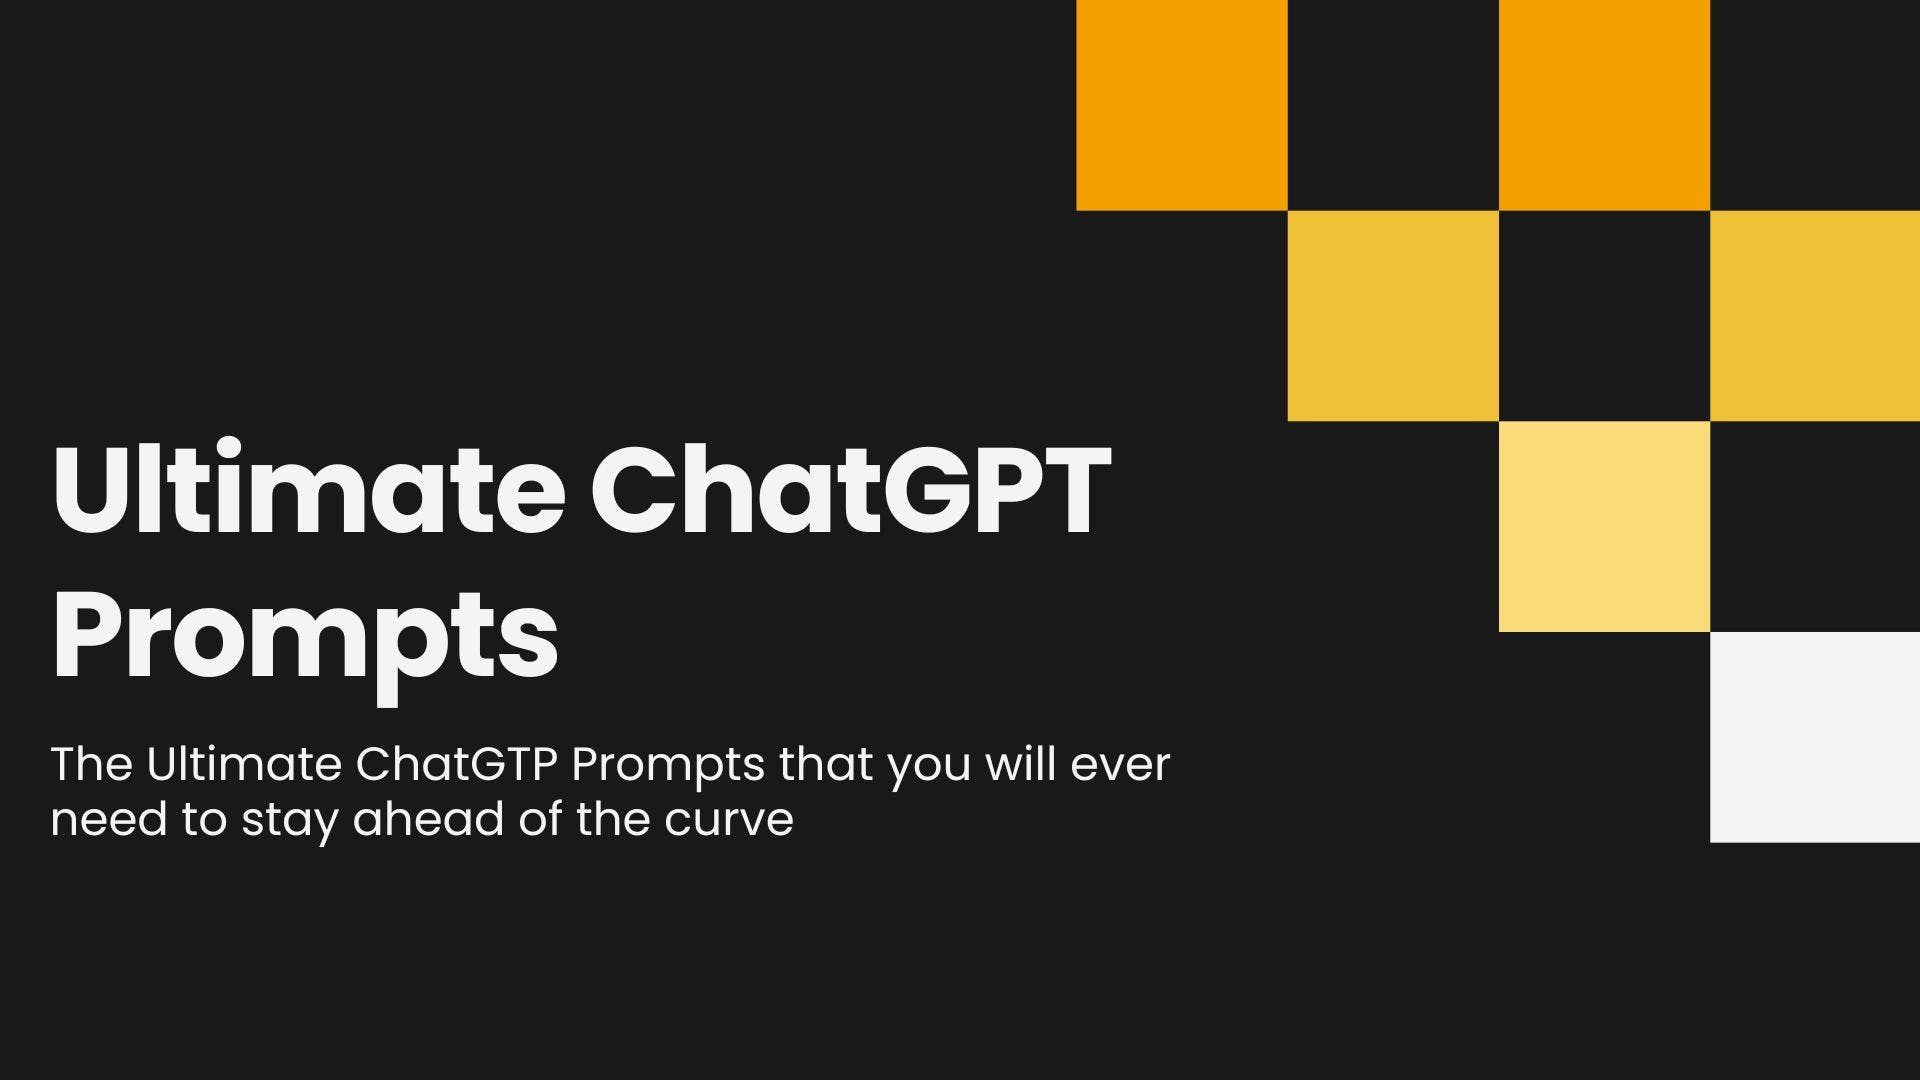 ChatGPT - Prompts for 10x Productivity media 1